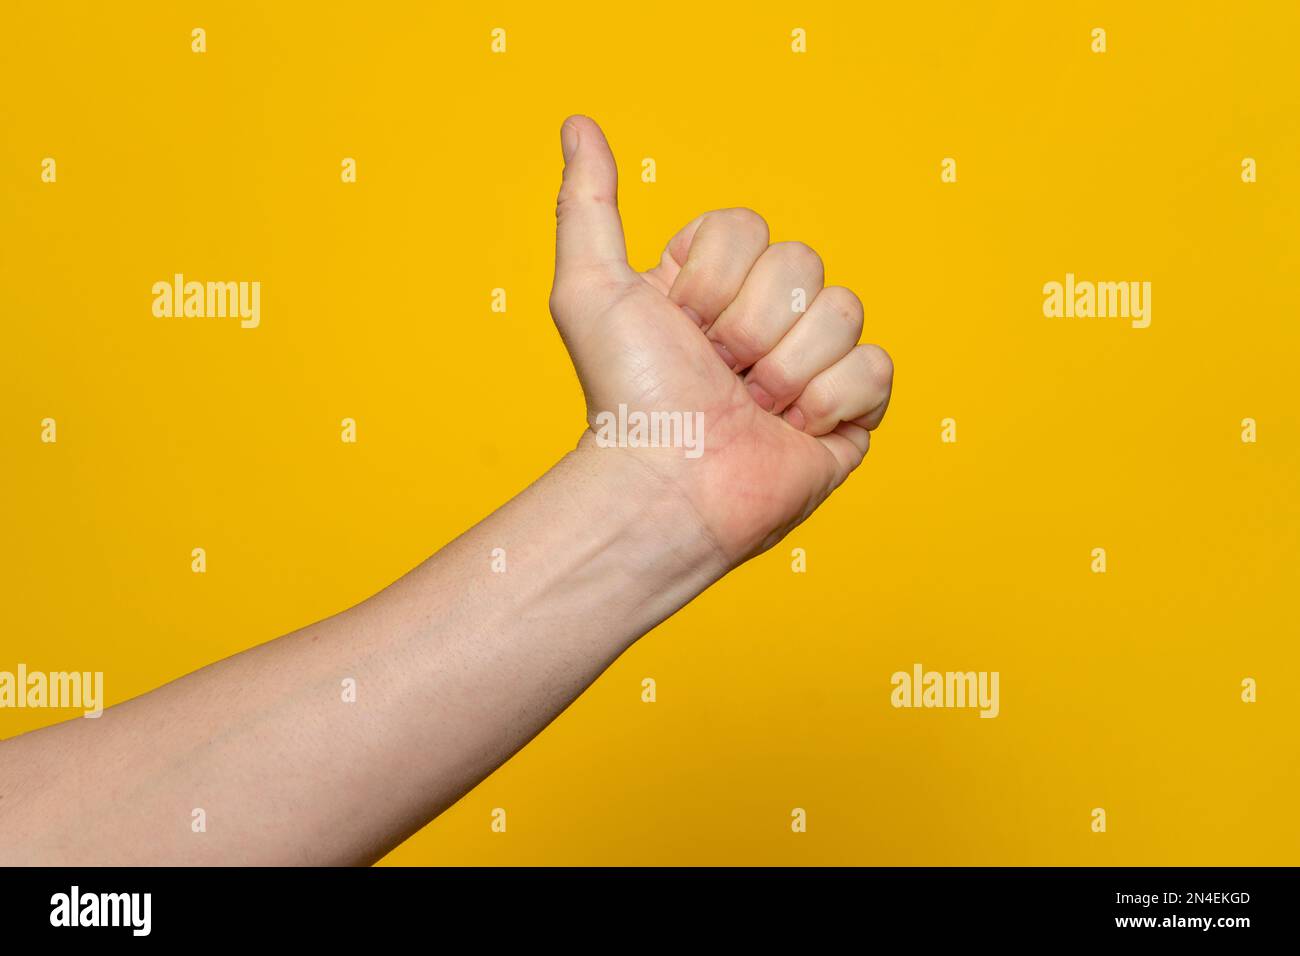 Thumb up hand sign. Man's hand showing thumb up, like, ok, approval, accept, okay, good, positive hand gesture. Isolated on yellow background Stock Photo